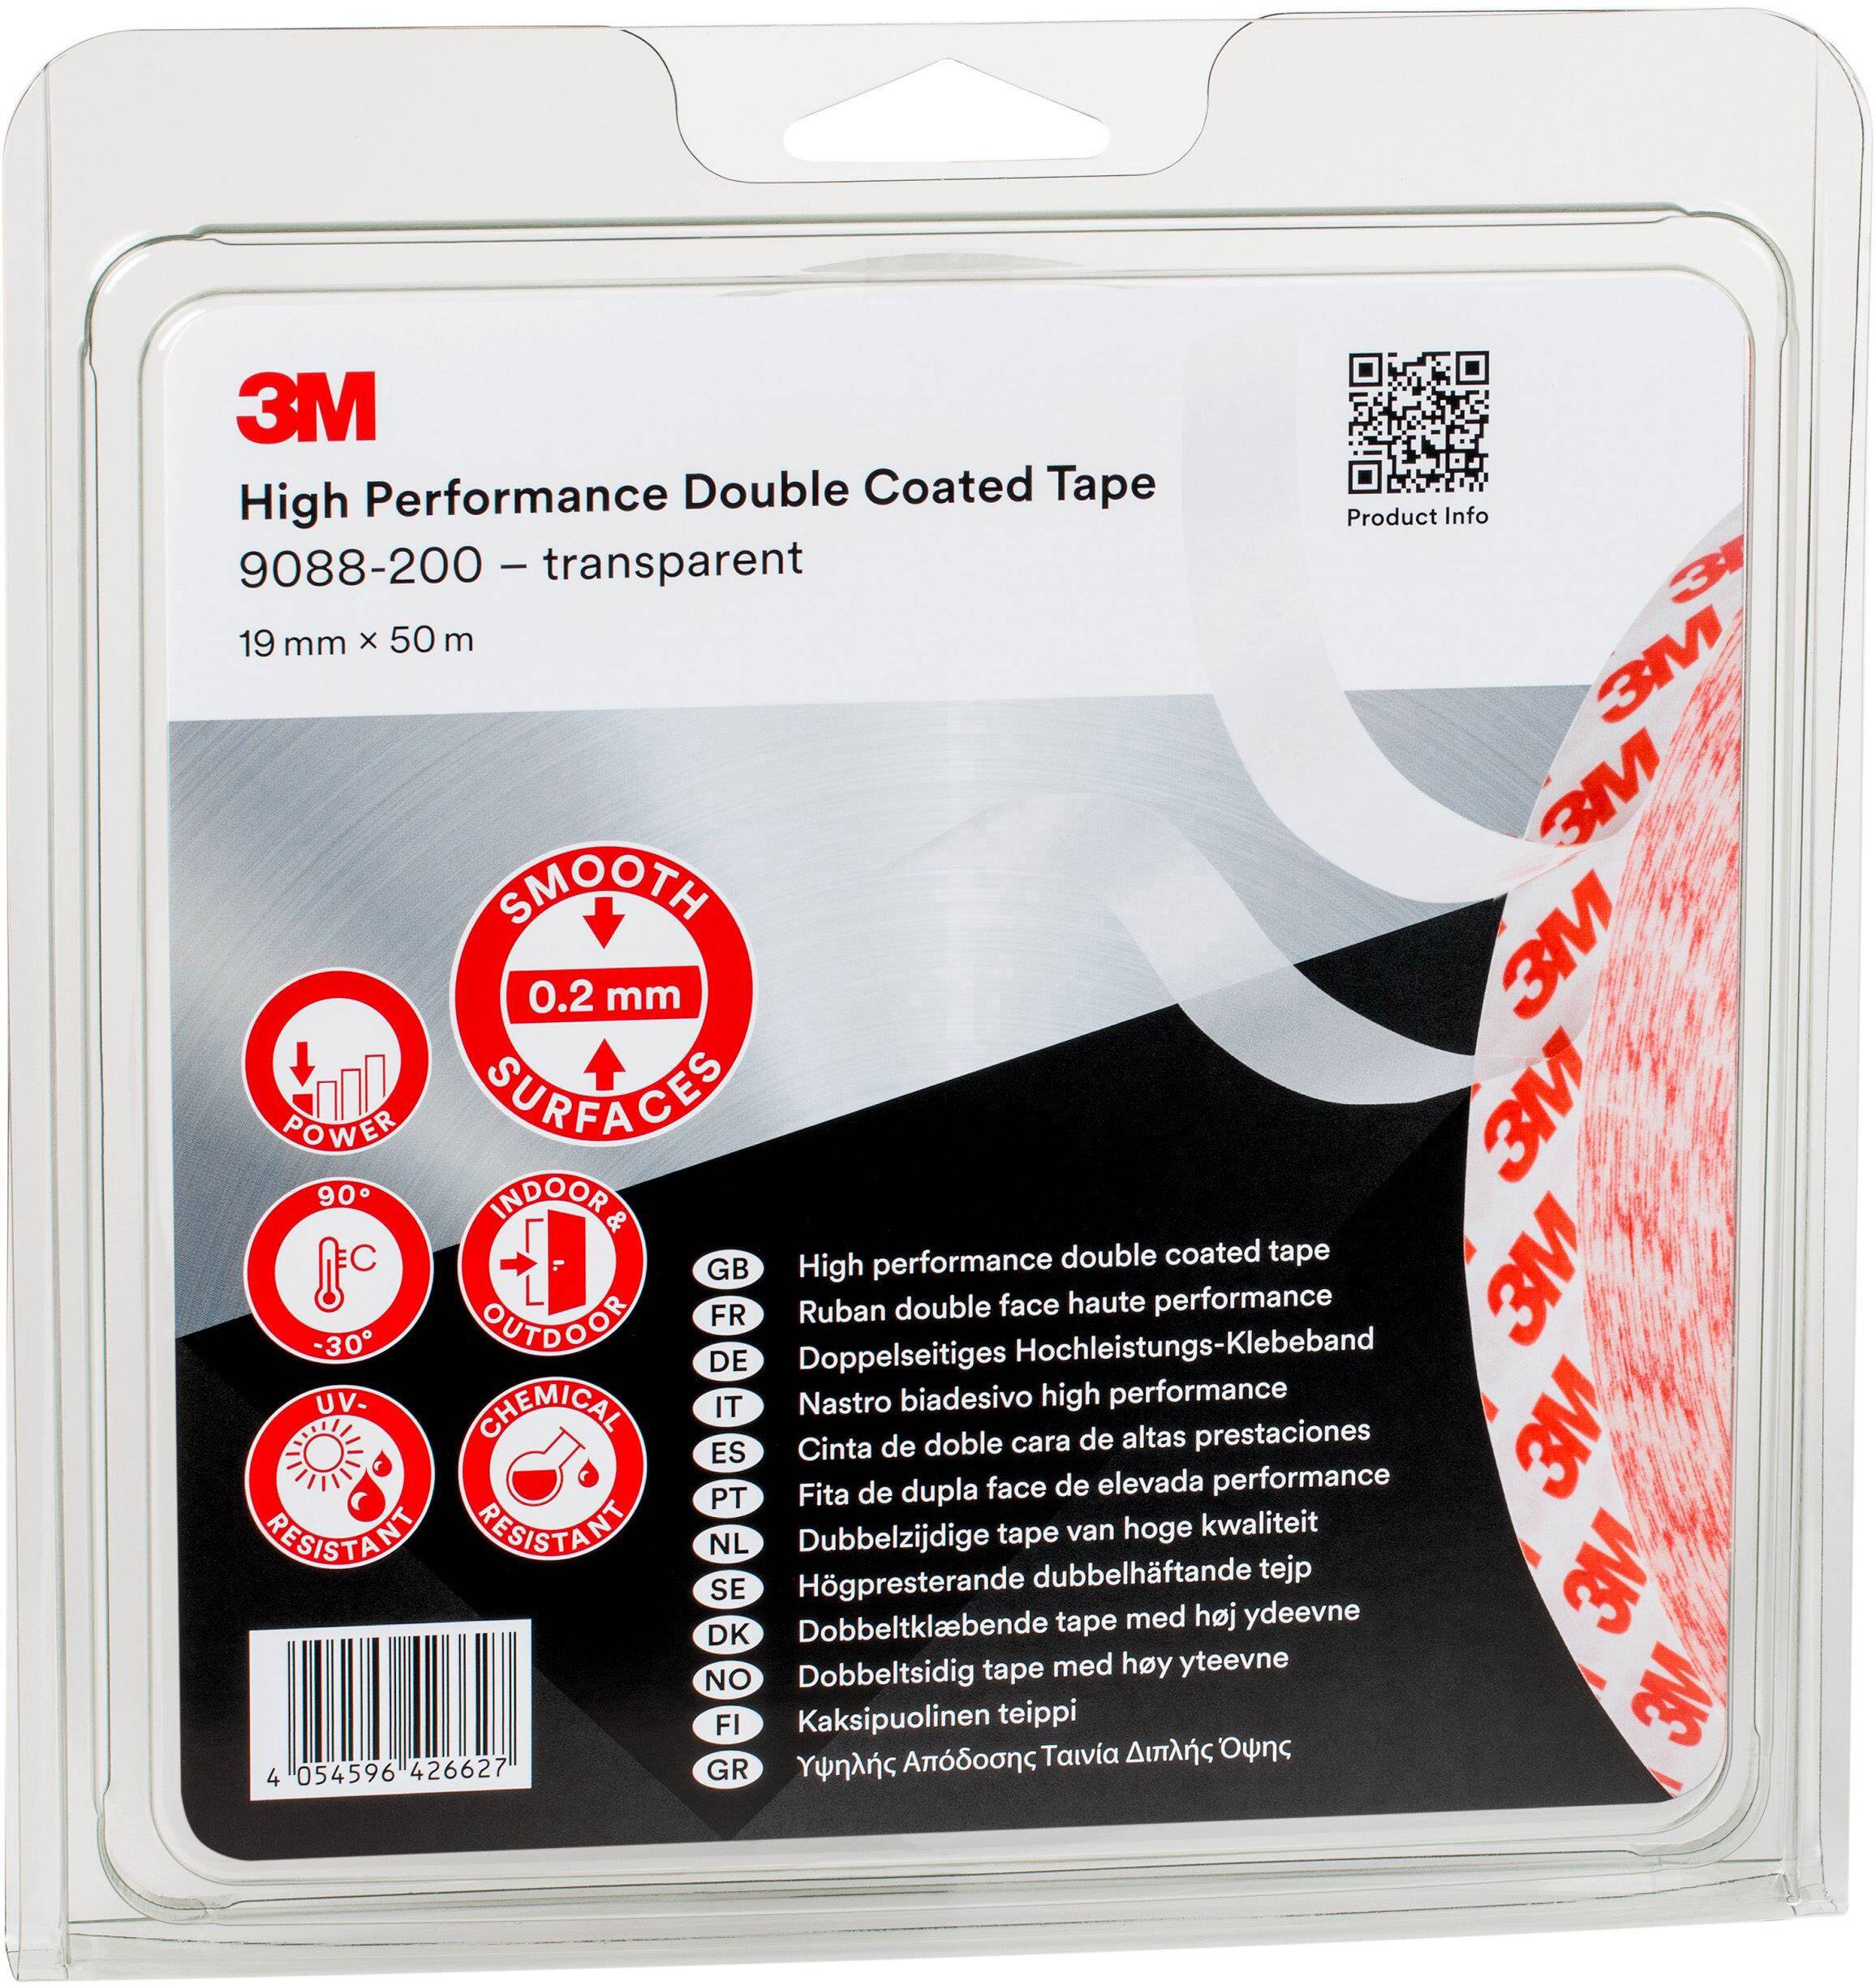 Double sided tape 3m ™ 9088-200 Transparent Roll by 50mt for Universal Use 